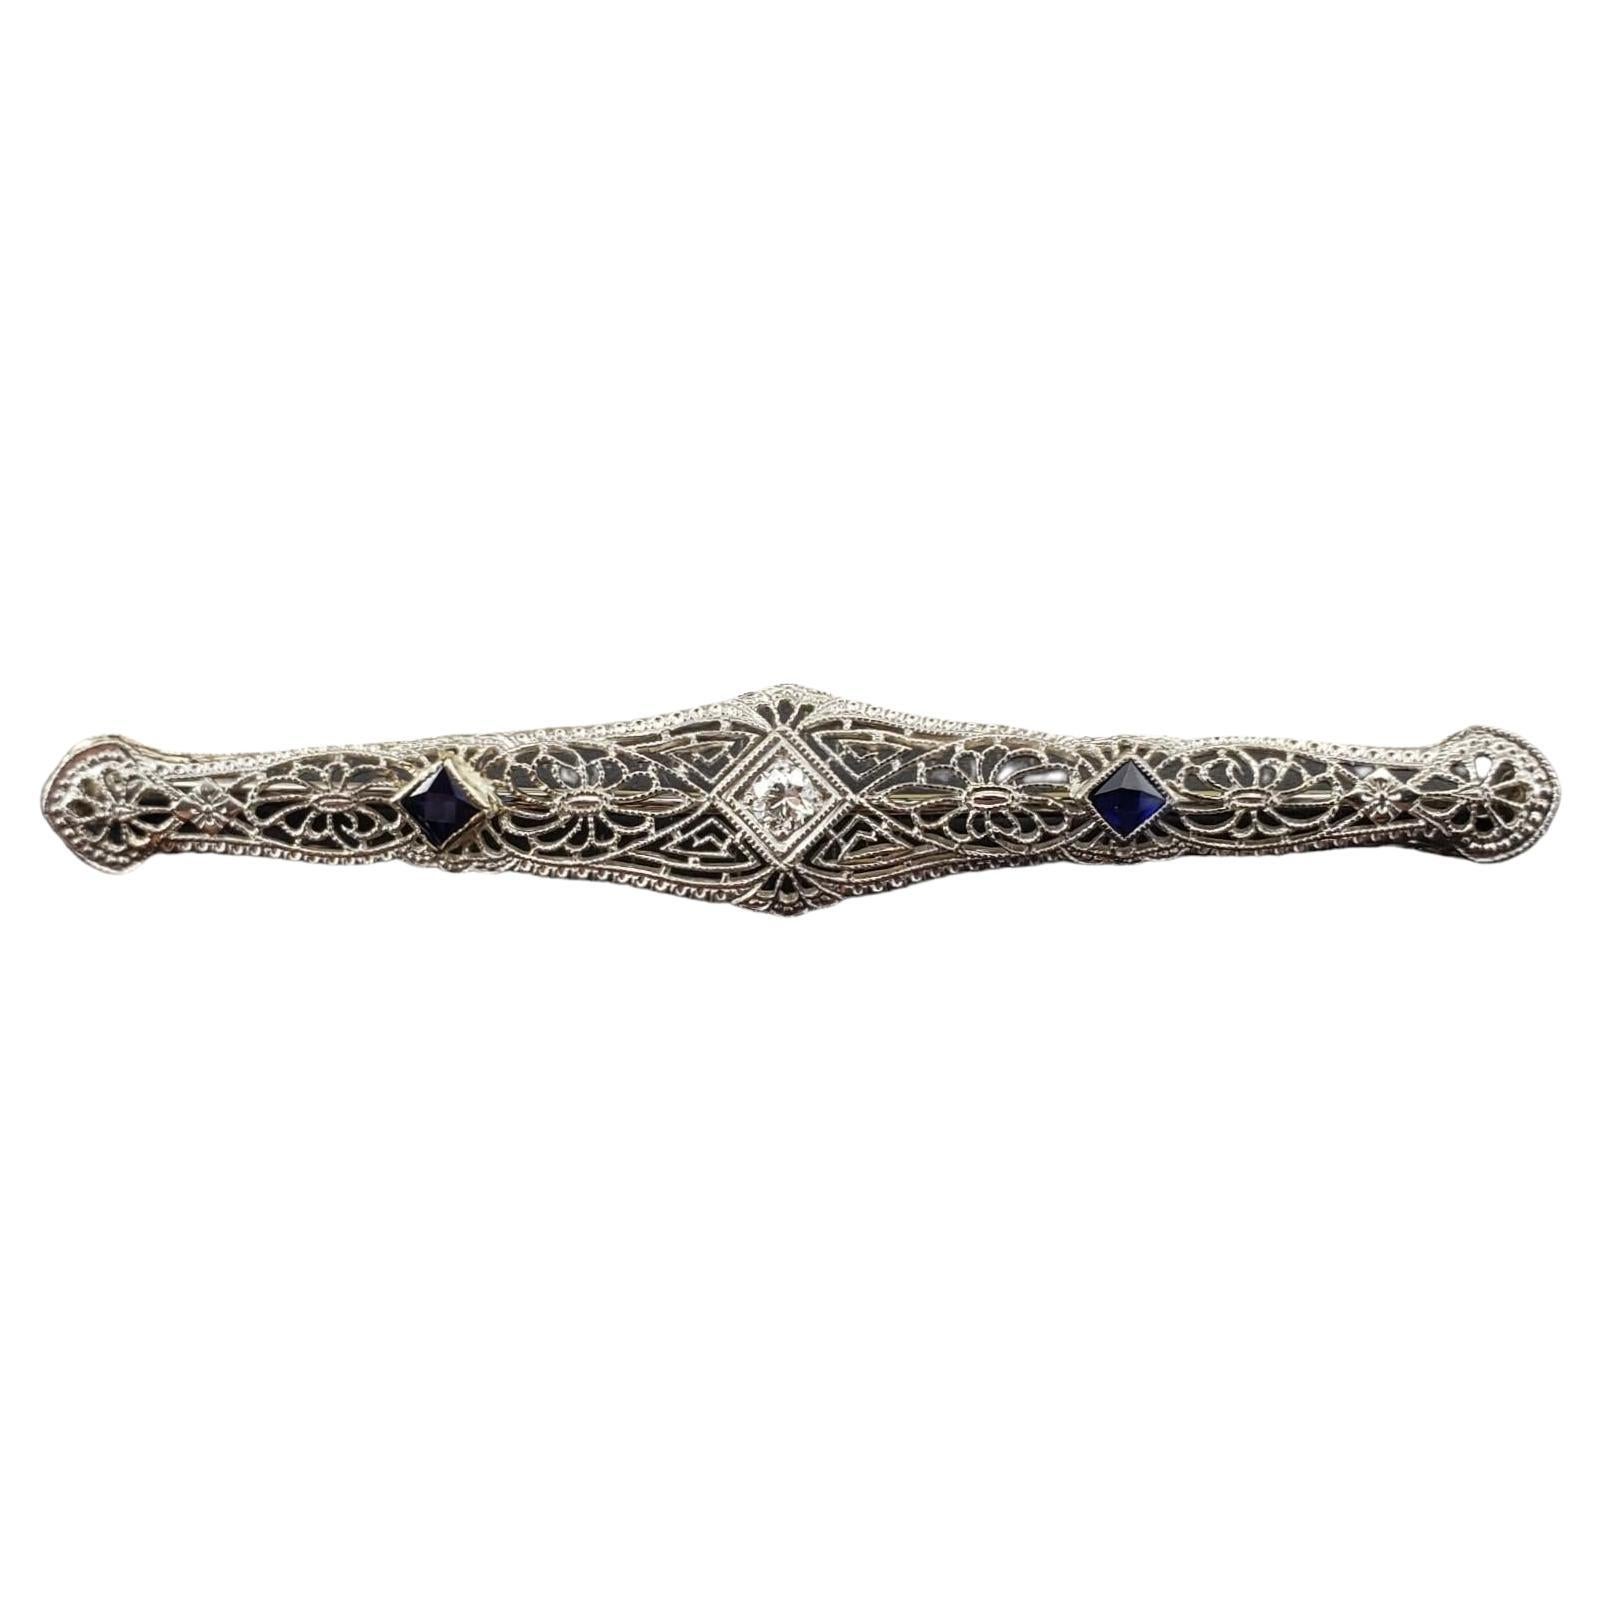 14K White Gold Filigree Simulated Sapphire & Diamond Brooch/Pin #17099 For Sale